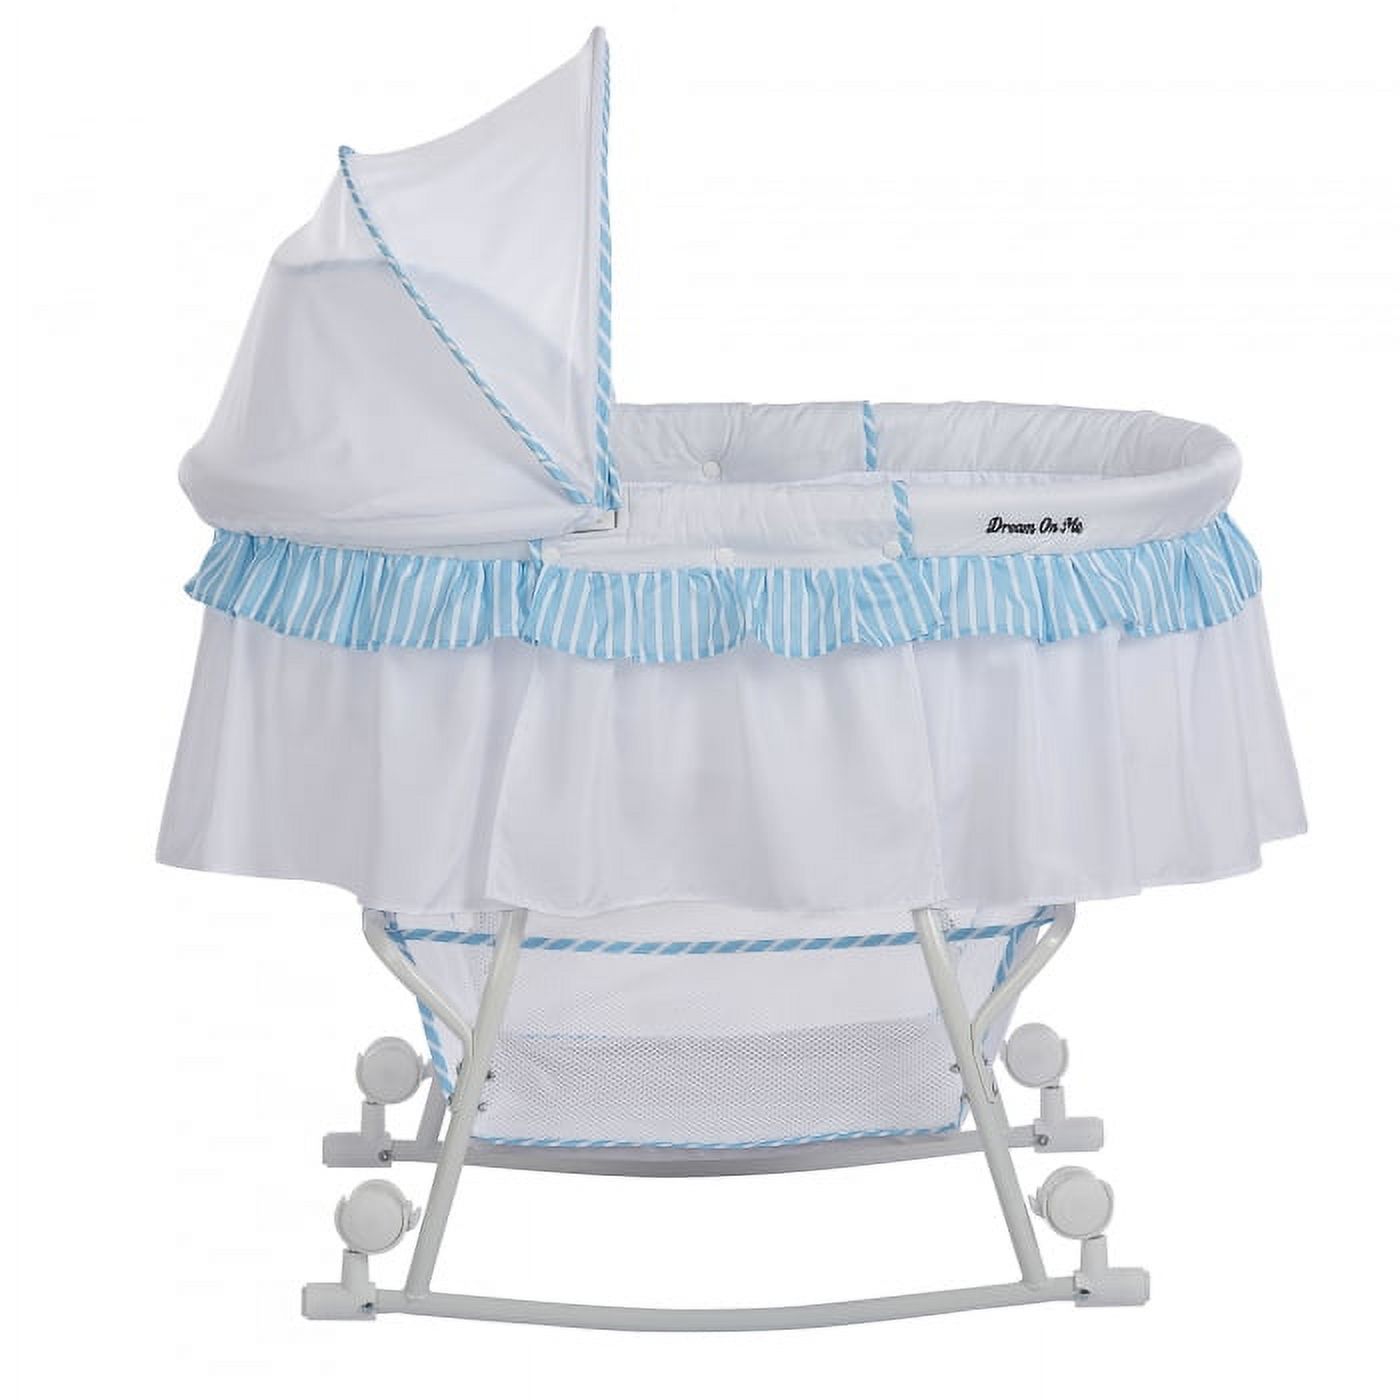 Dream On Me Lacy Portable 2-in-1 Bassinet & Cradle in Blue and White, Lightweight Baby Bassinet - image 3 of 6